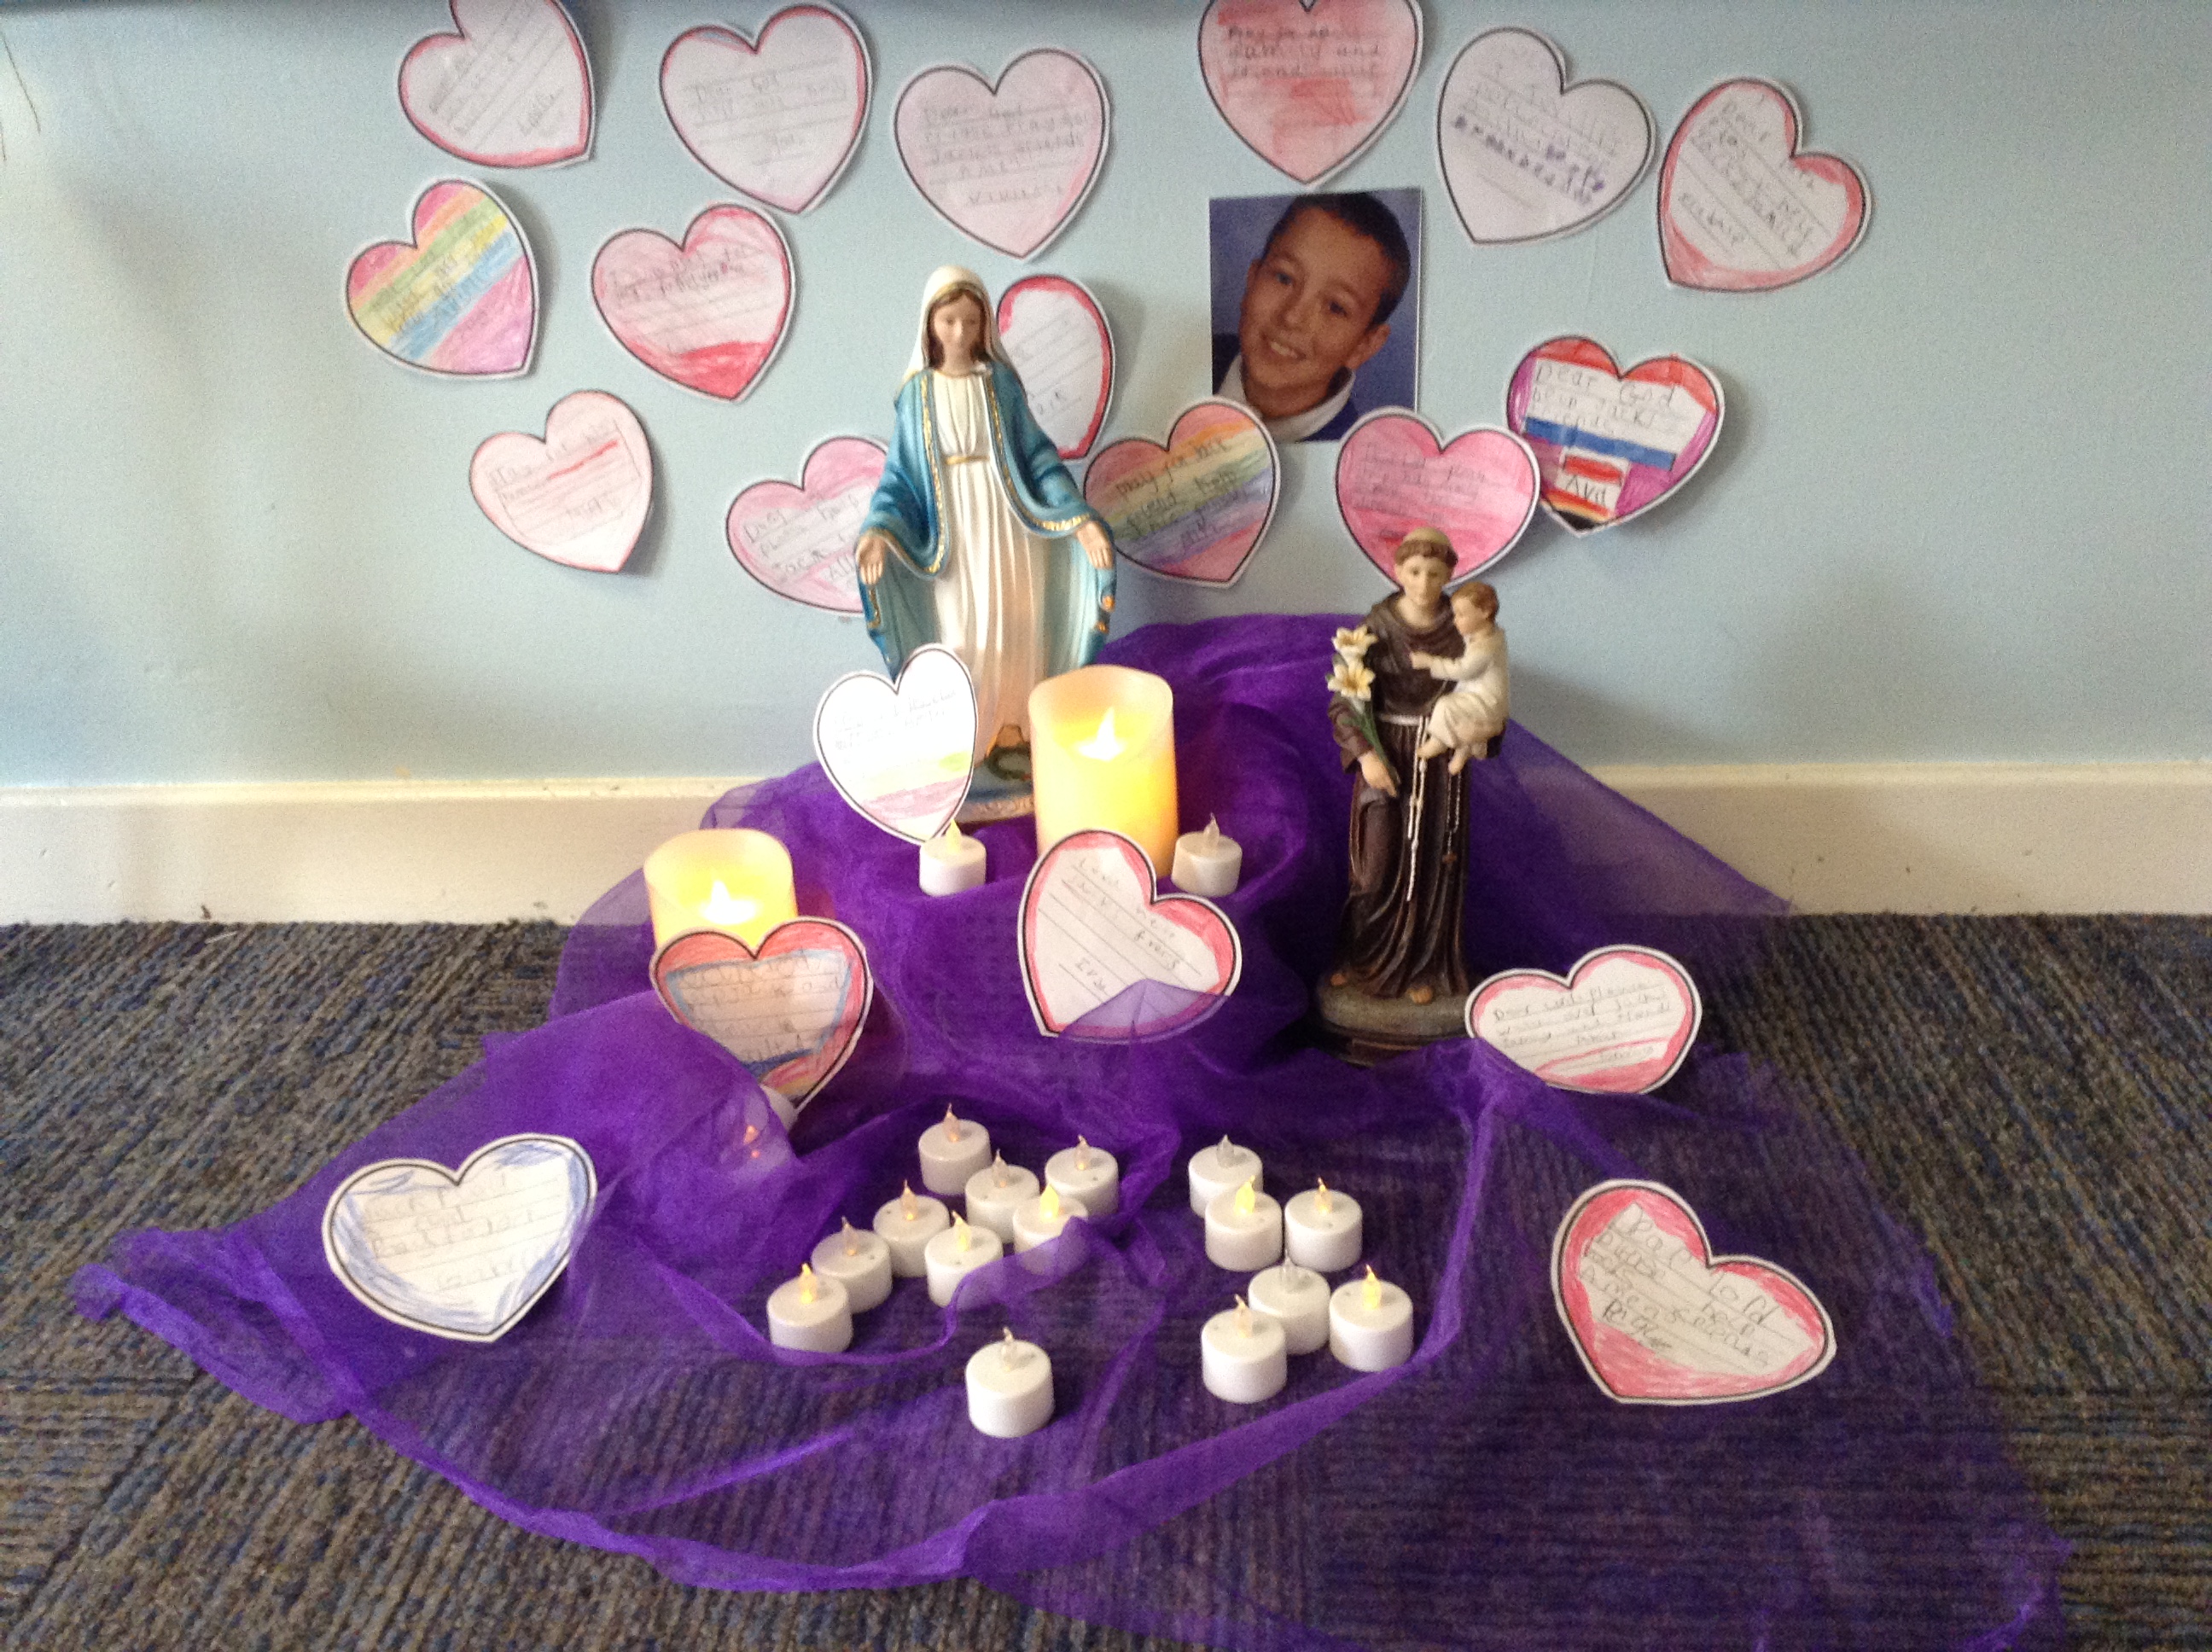 Catholic school pays tribute to children who died in freezing lake